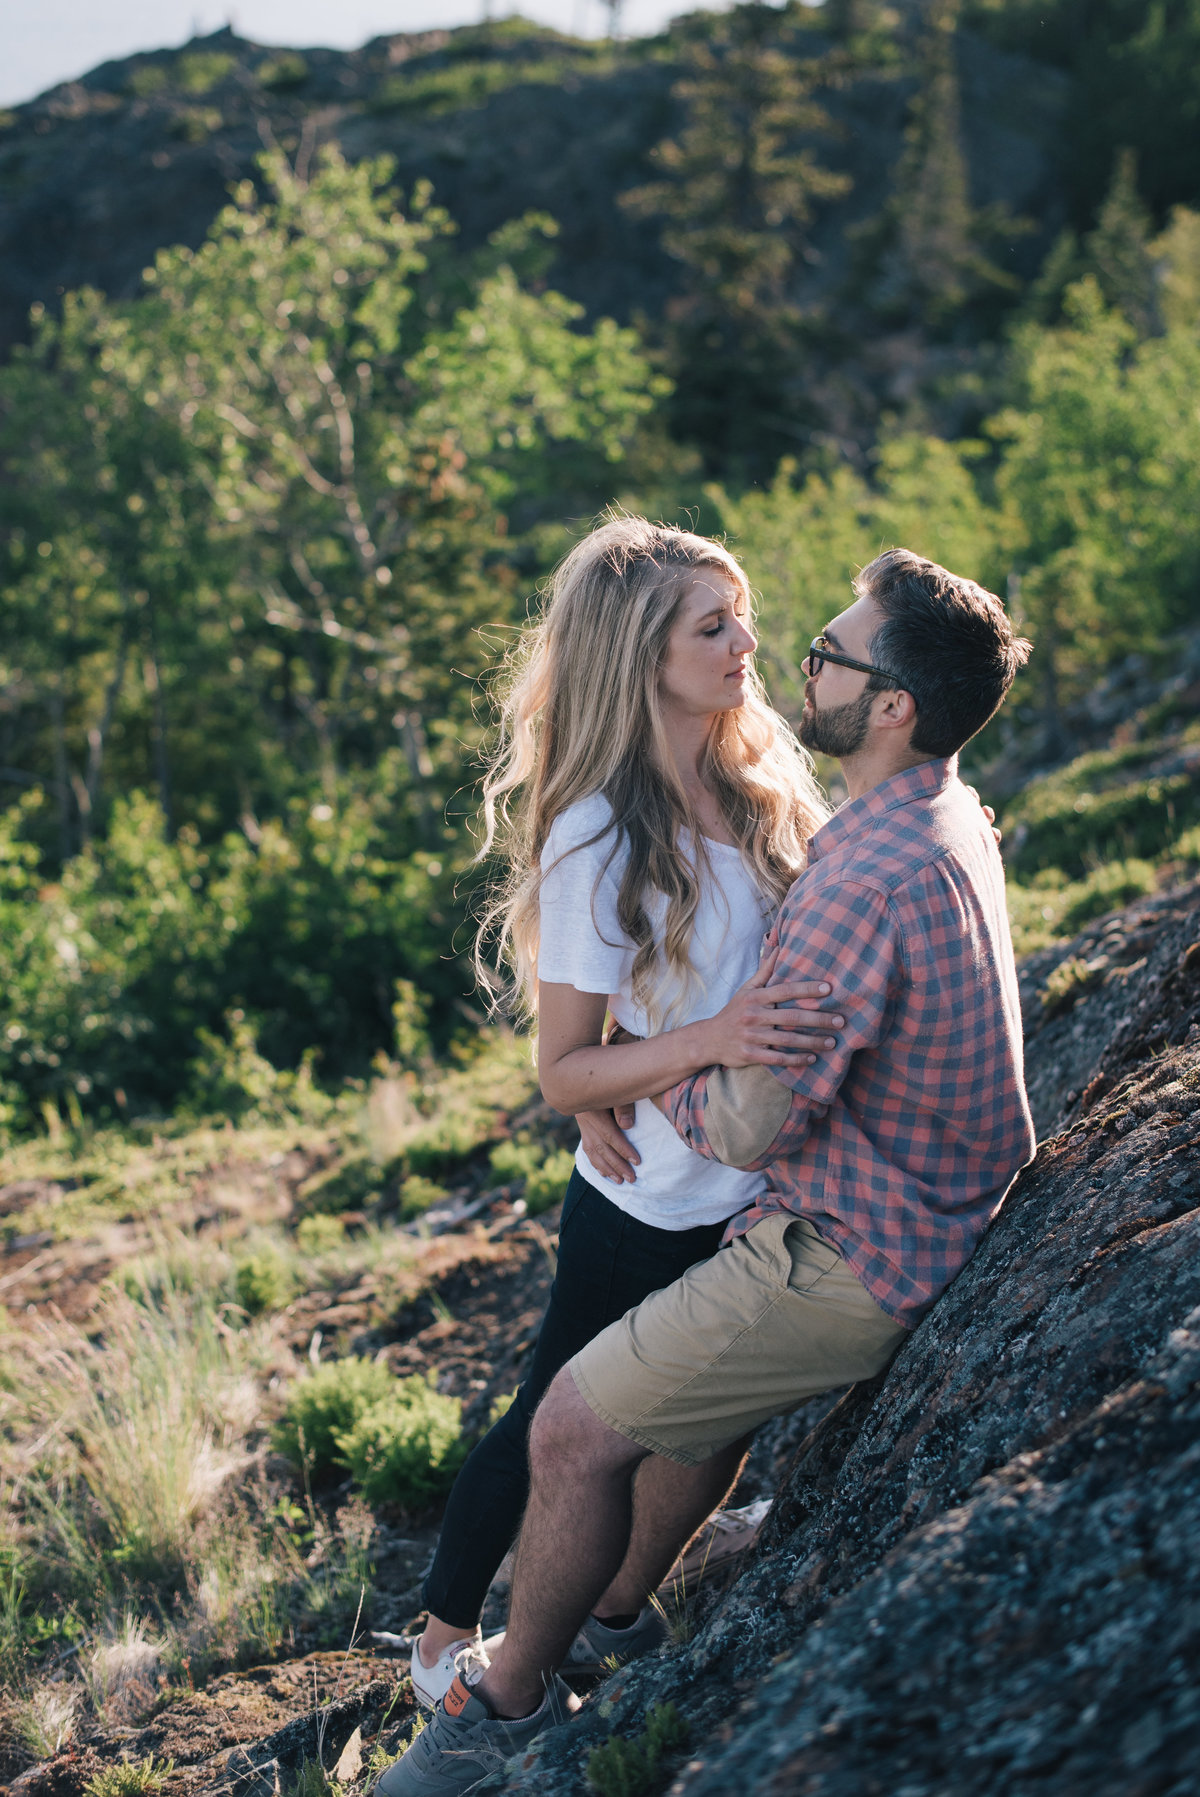 004_Erica Rose Photography_Anchorage Engagement Photographer_Featured